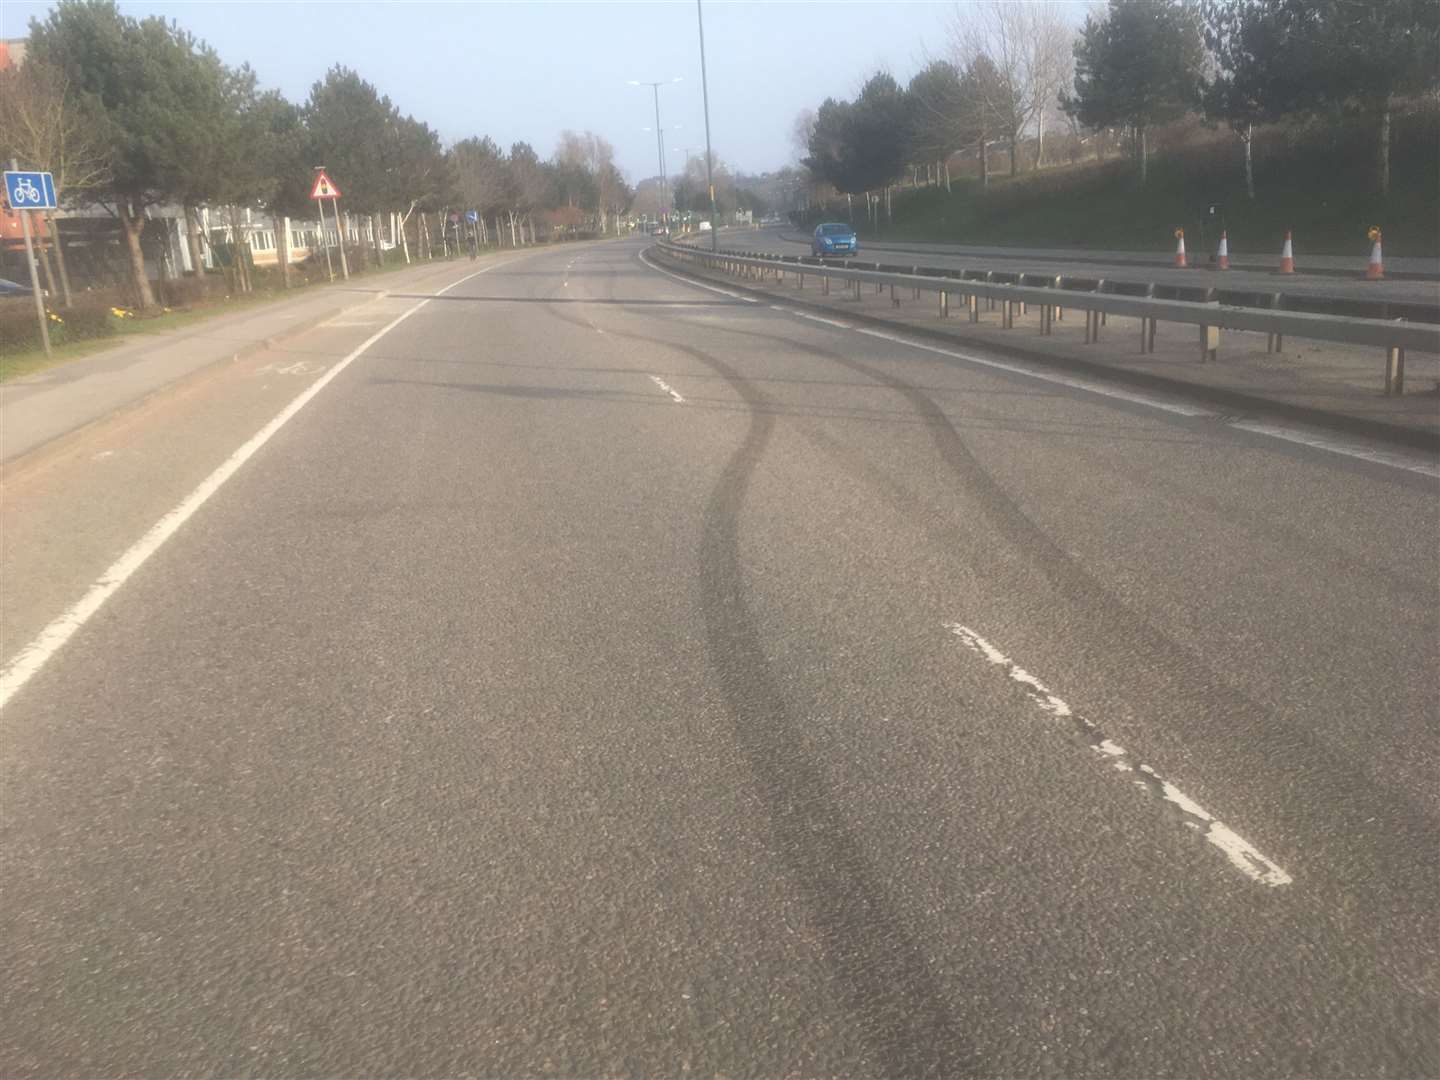 Tyre marks have been left in the road in Crossways Boulevard previously